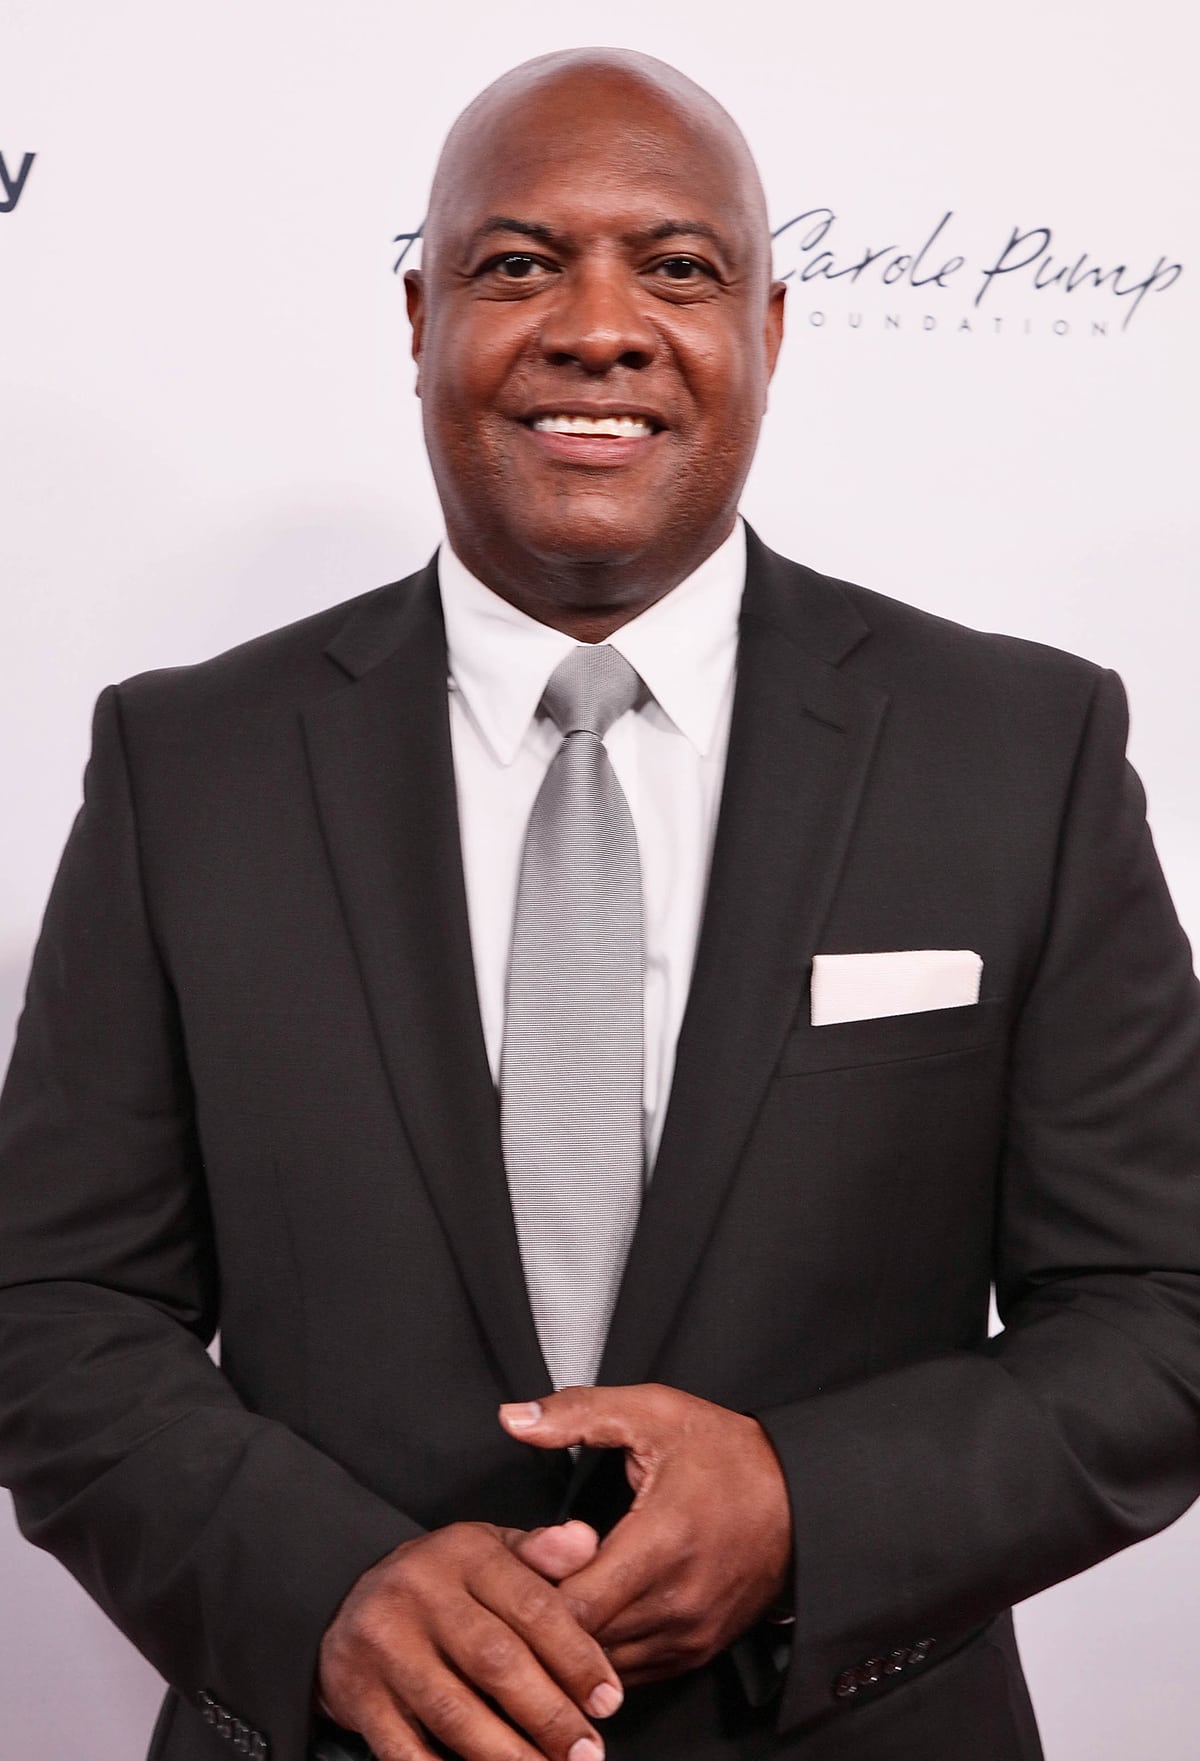 Rodney Peete is a retired American professional football quarterback best known for his achievements in the National Football League